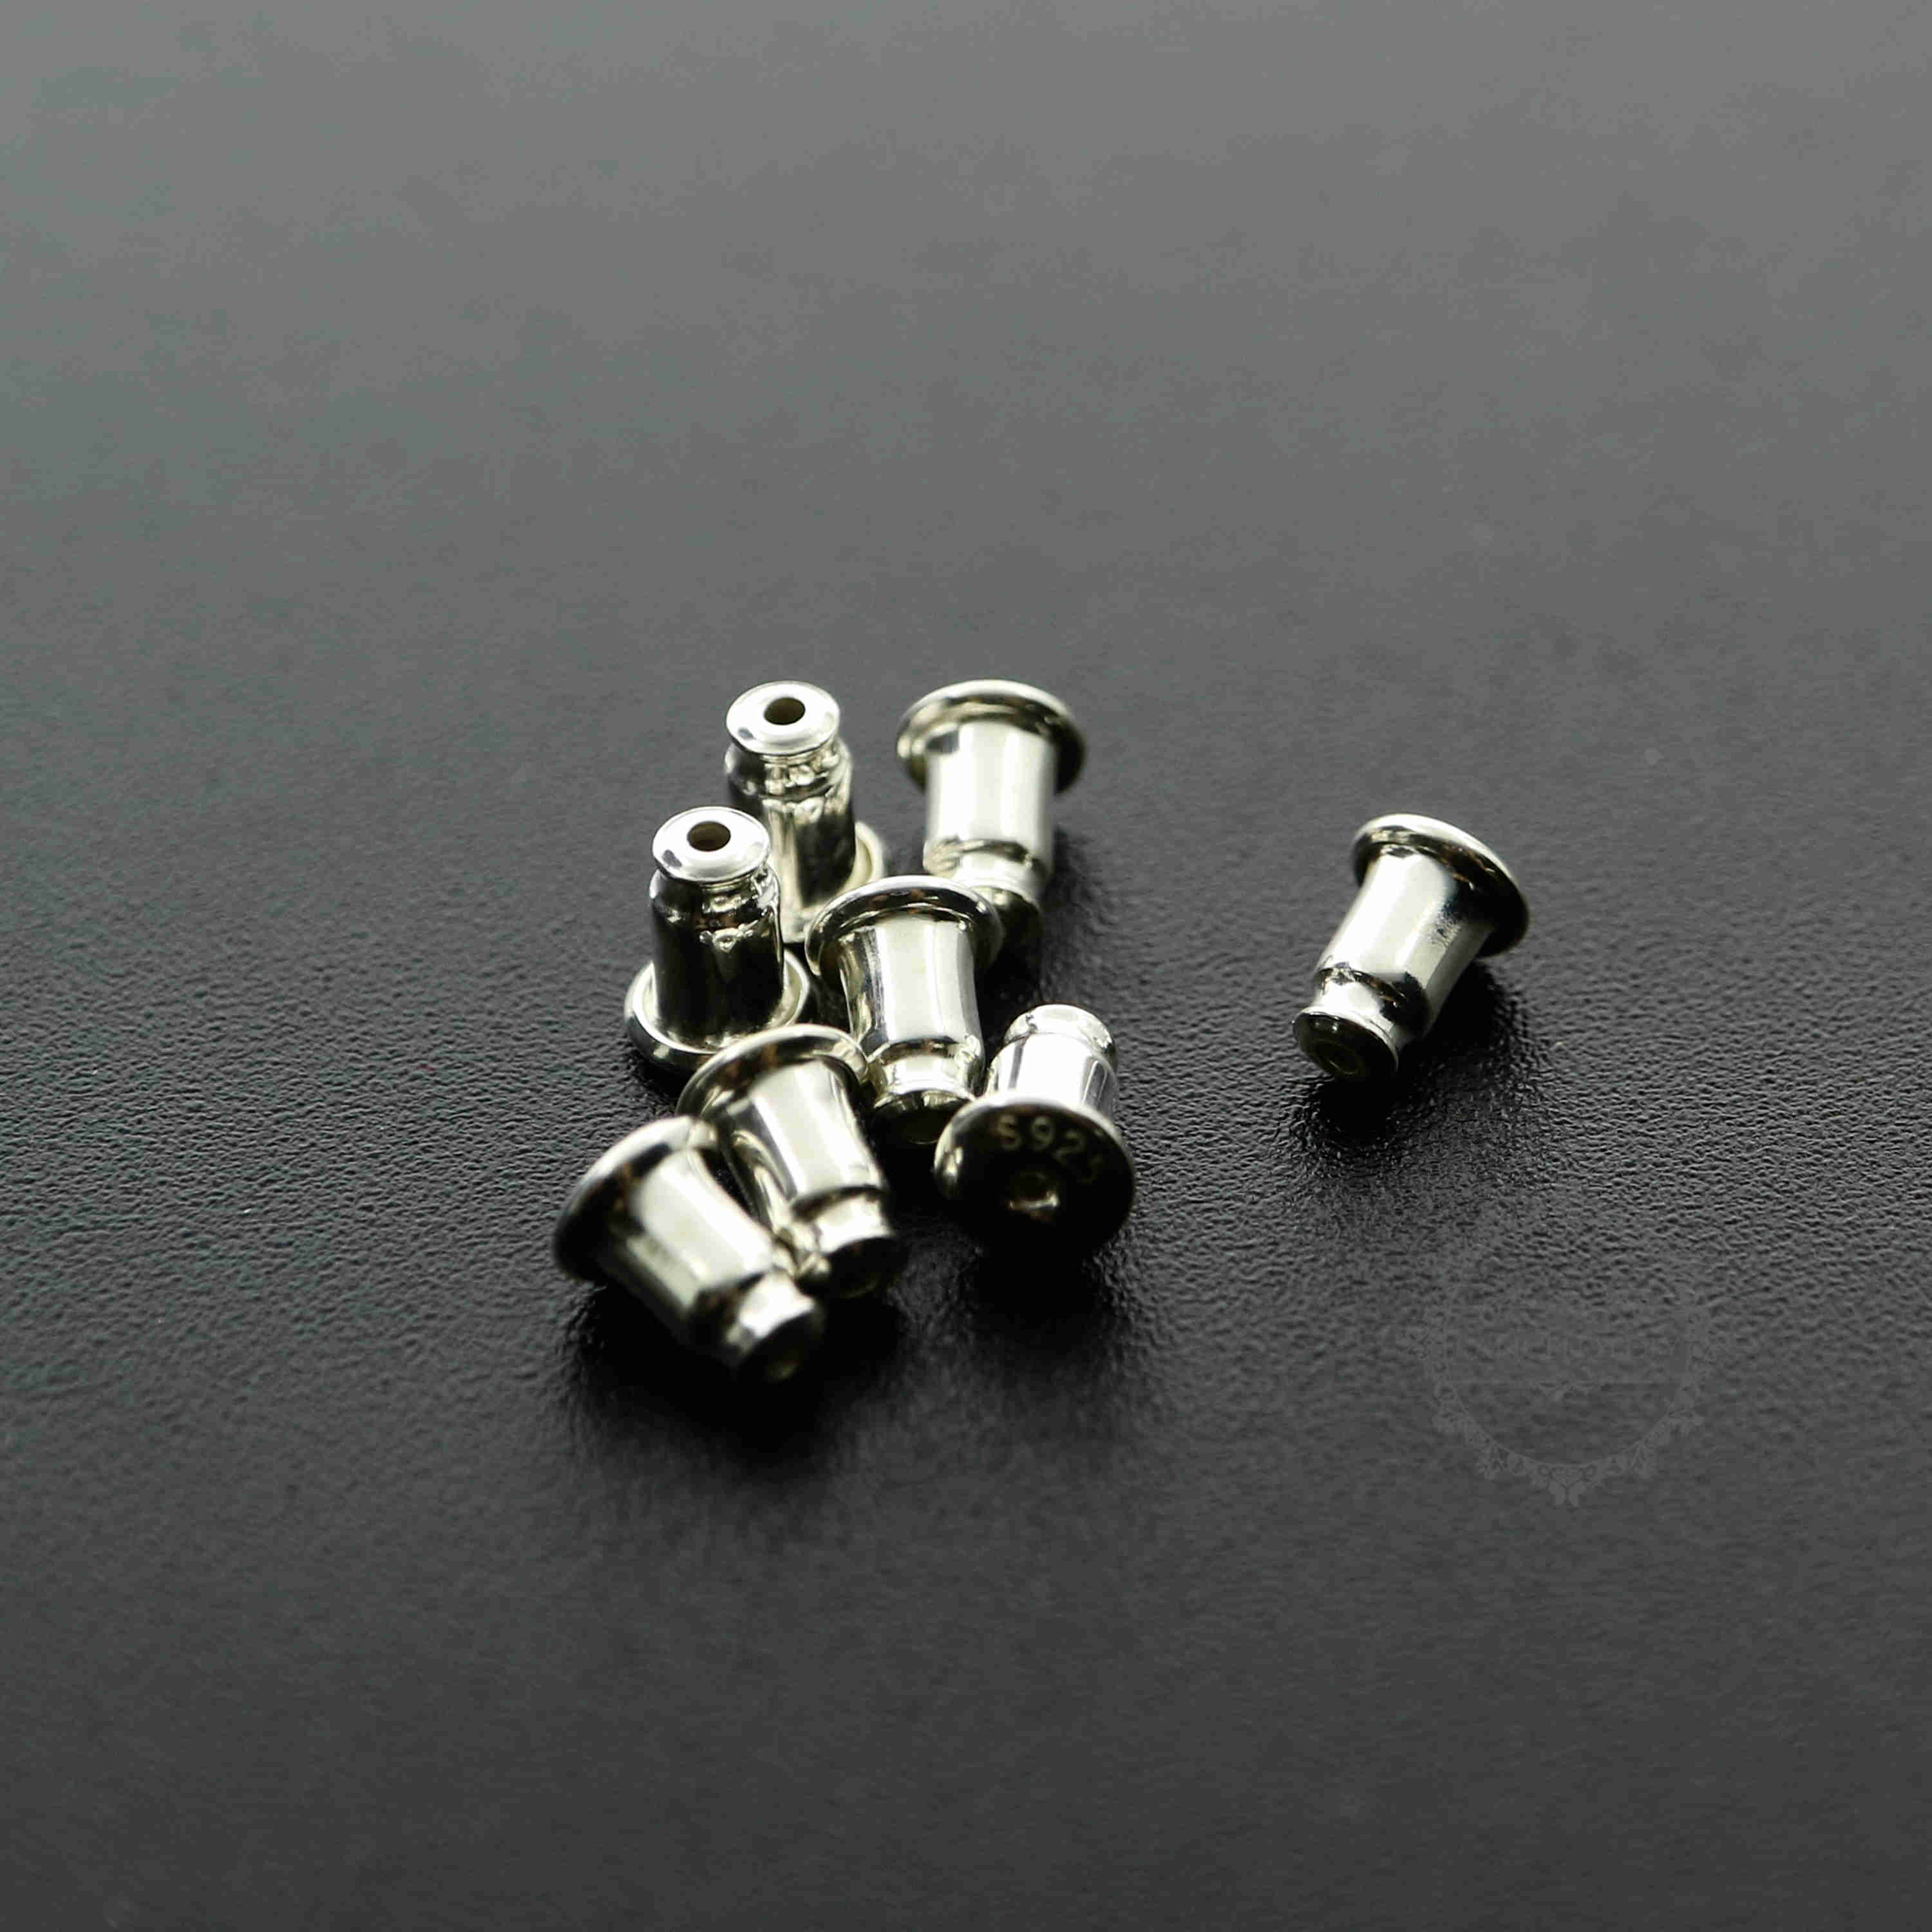 10pcs 4.5x6mm 925 sterling silver DIY studs earrings back supplies findings 1702168 - Click Image to Close